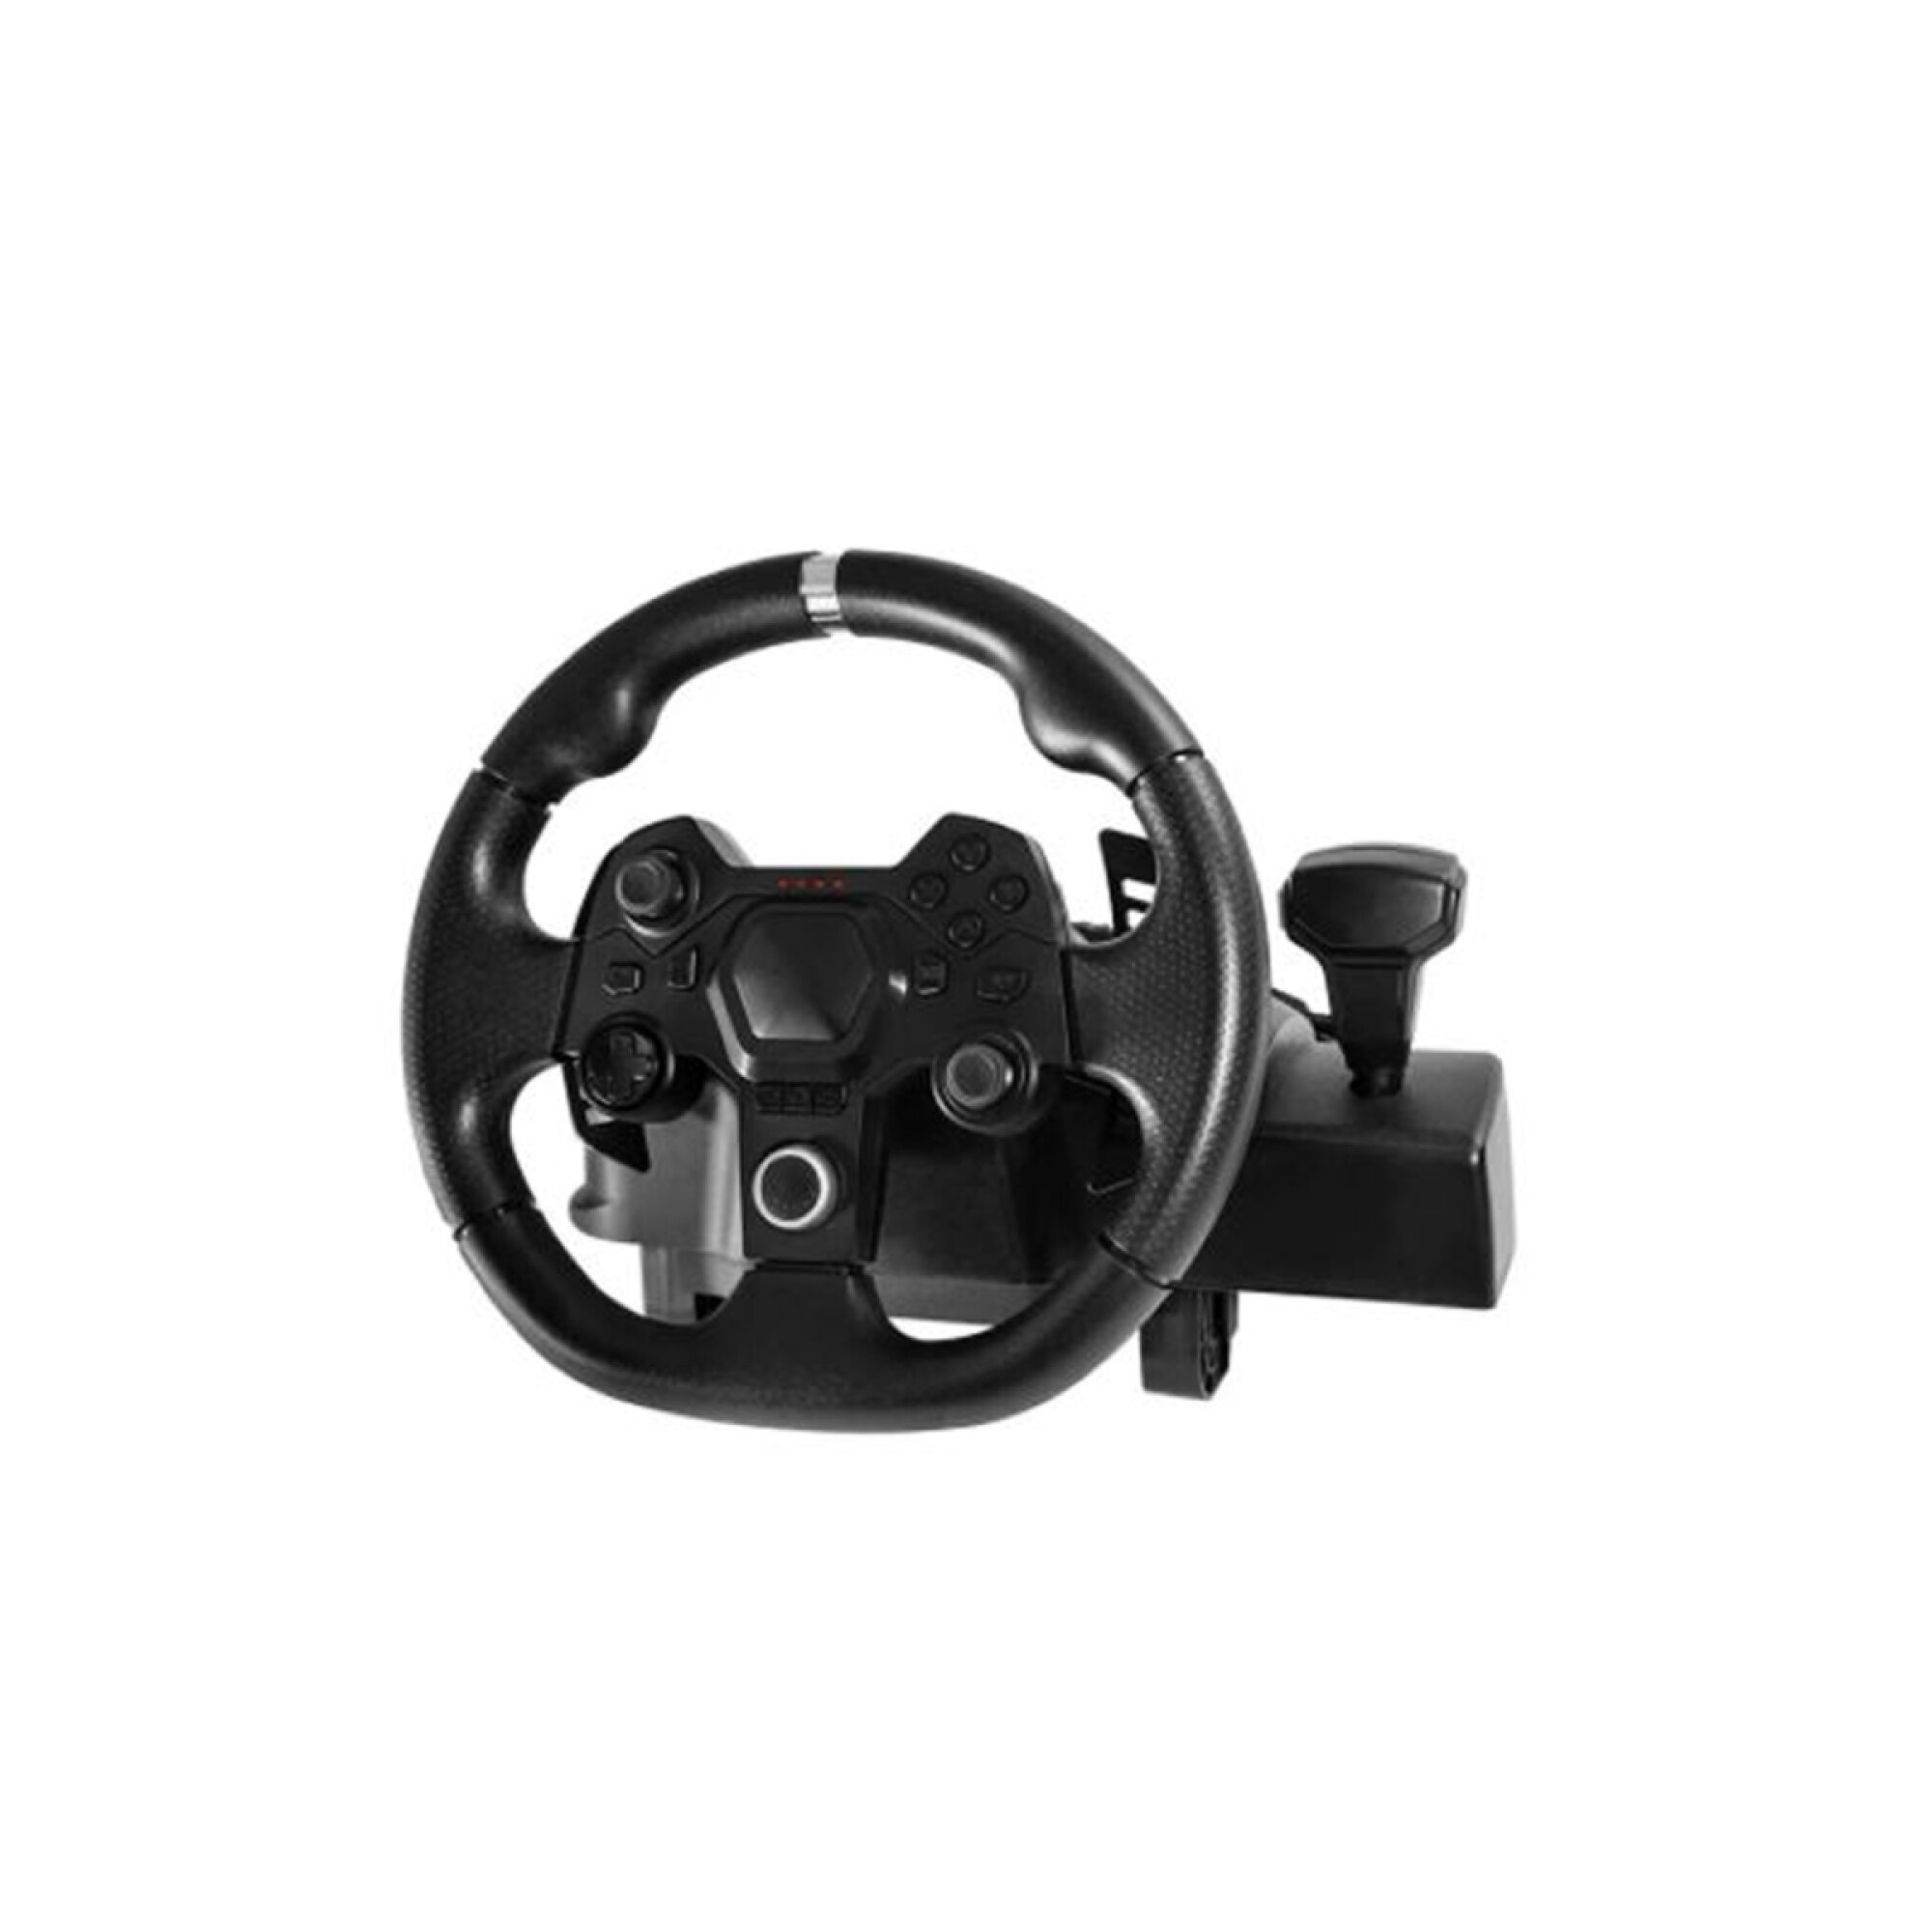 Volante con Pedales Para PS3/PS4/PC/XBOX ONE RW2700 IT2212 Onset